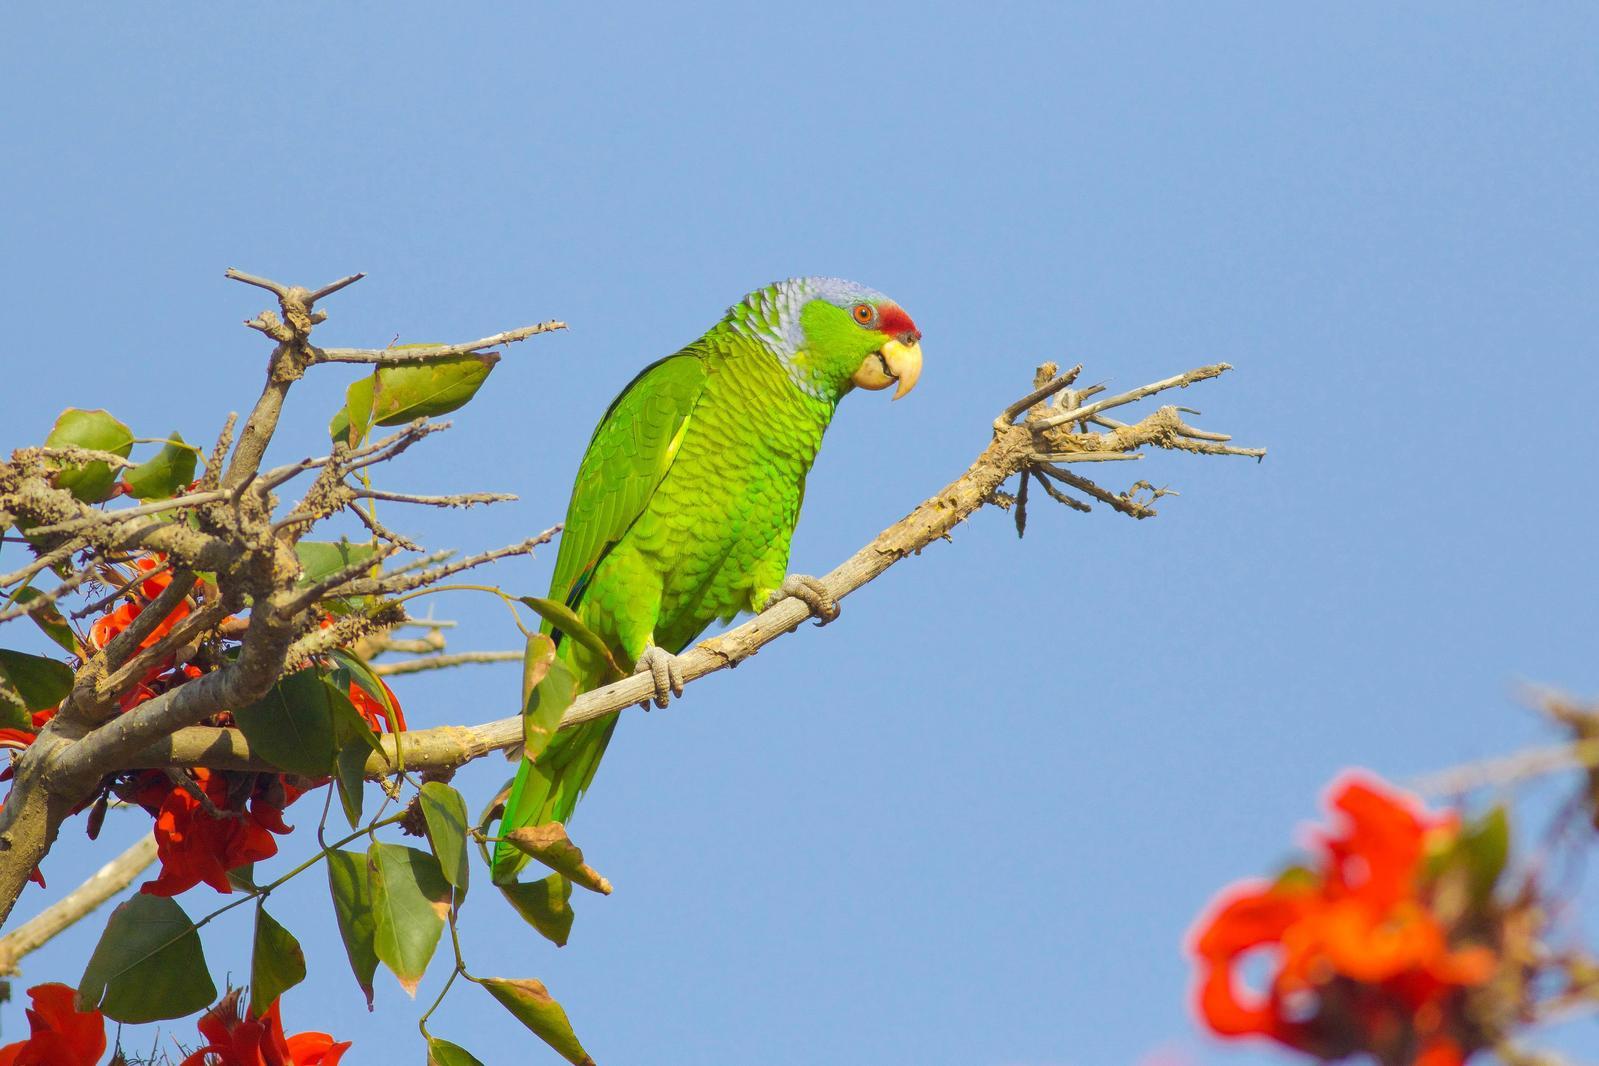 Lilac-crowned Parrot Photo by Tom Ford-Hutchinson